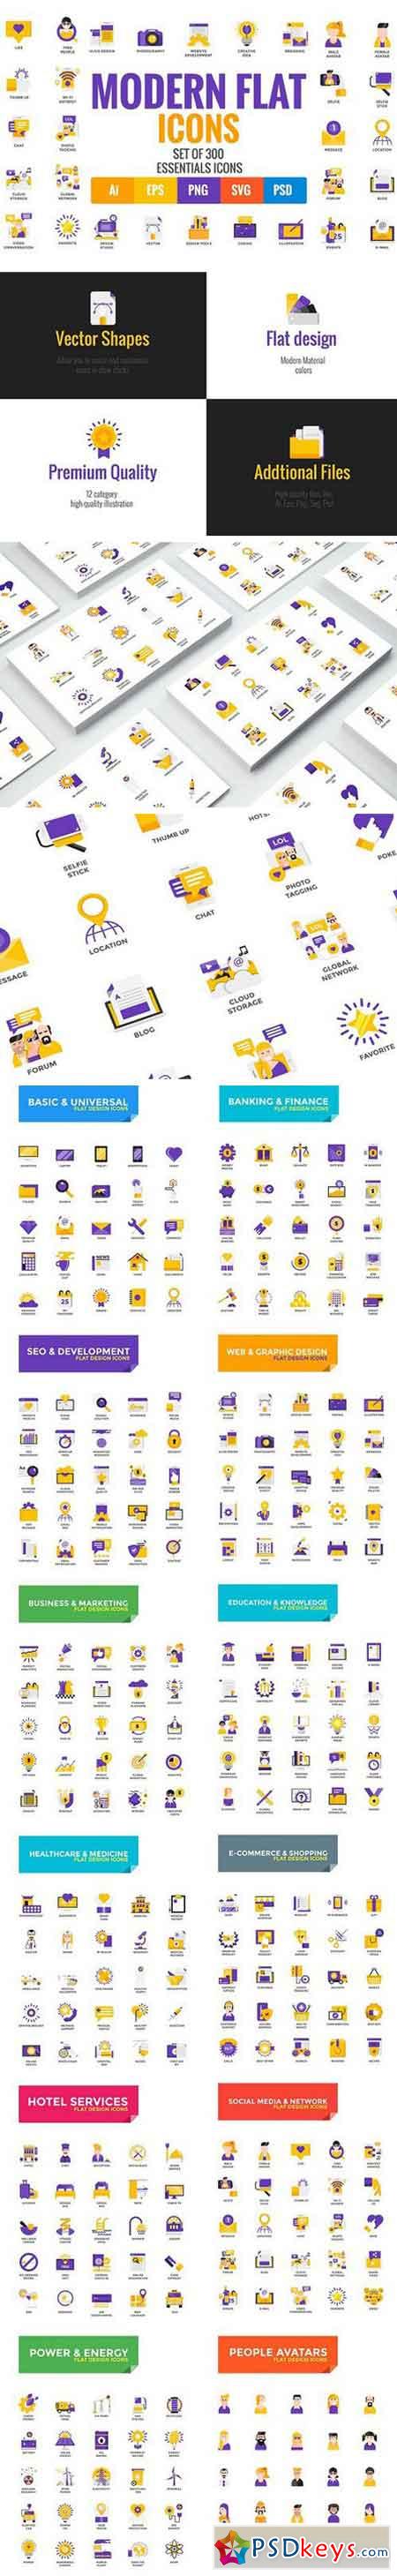 Big Collection of Modern icons 1502465